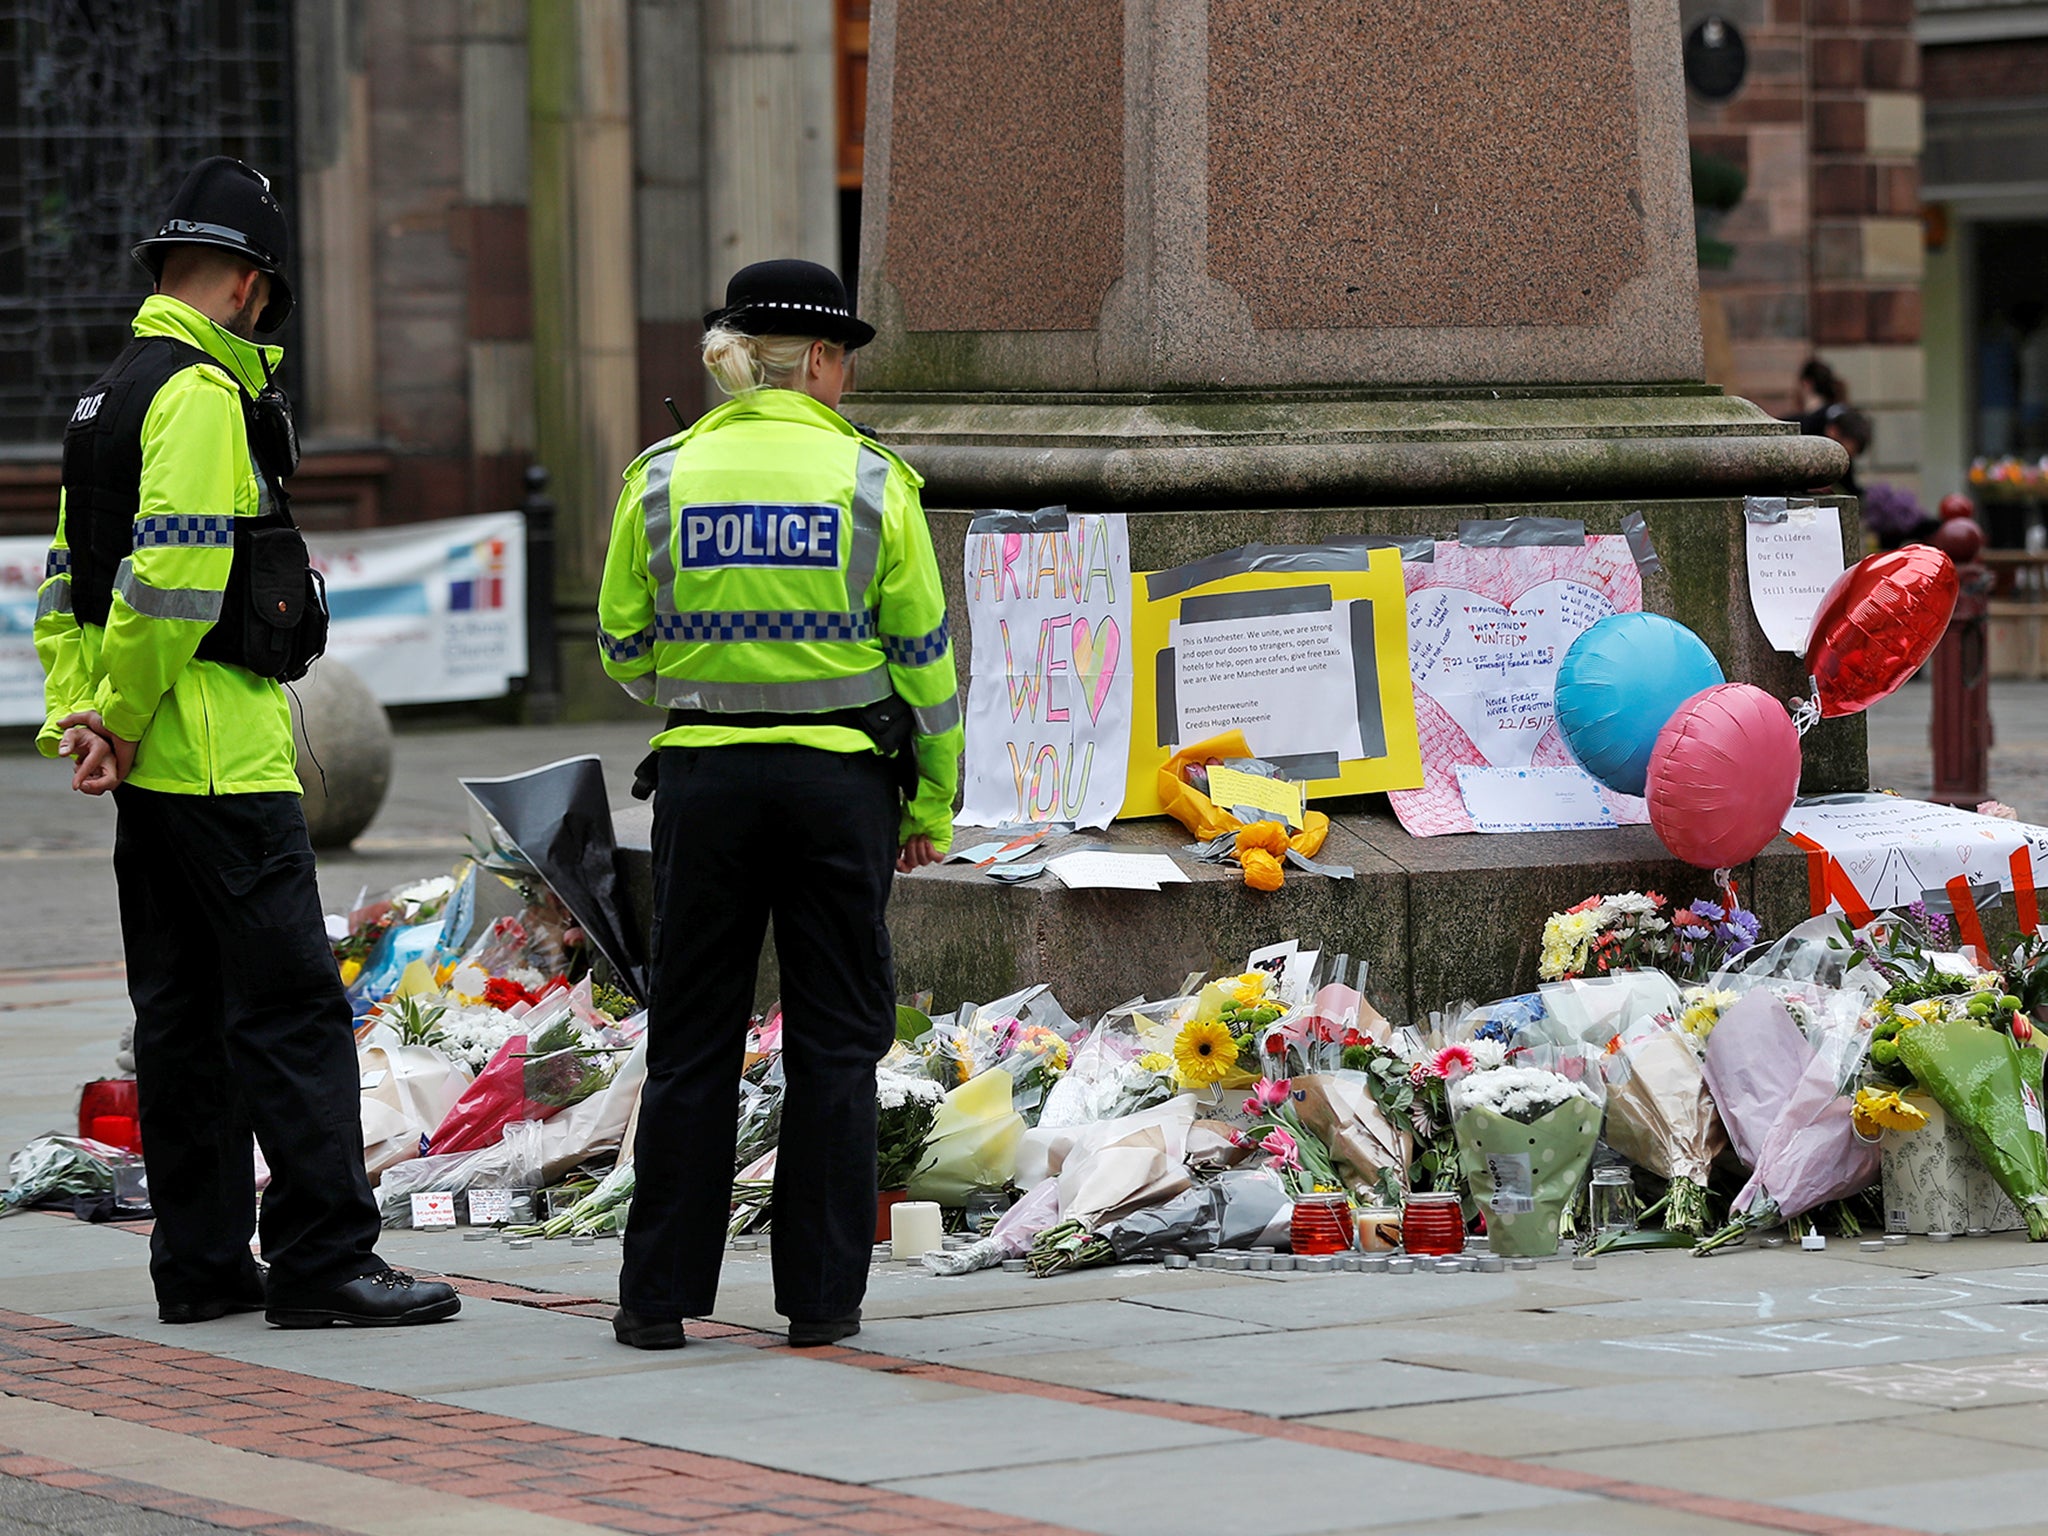 Police officers next to floral tributes left for the victims of the Manchester attack in May 2017